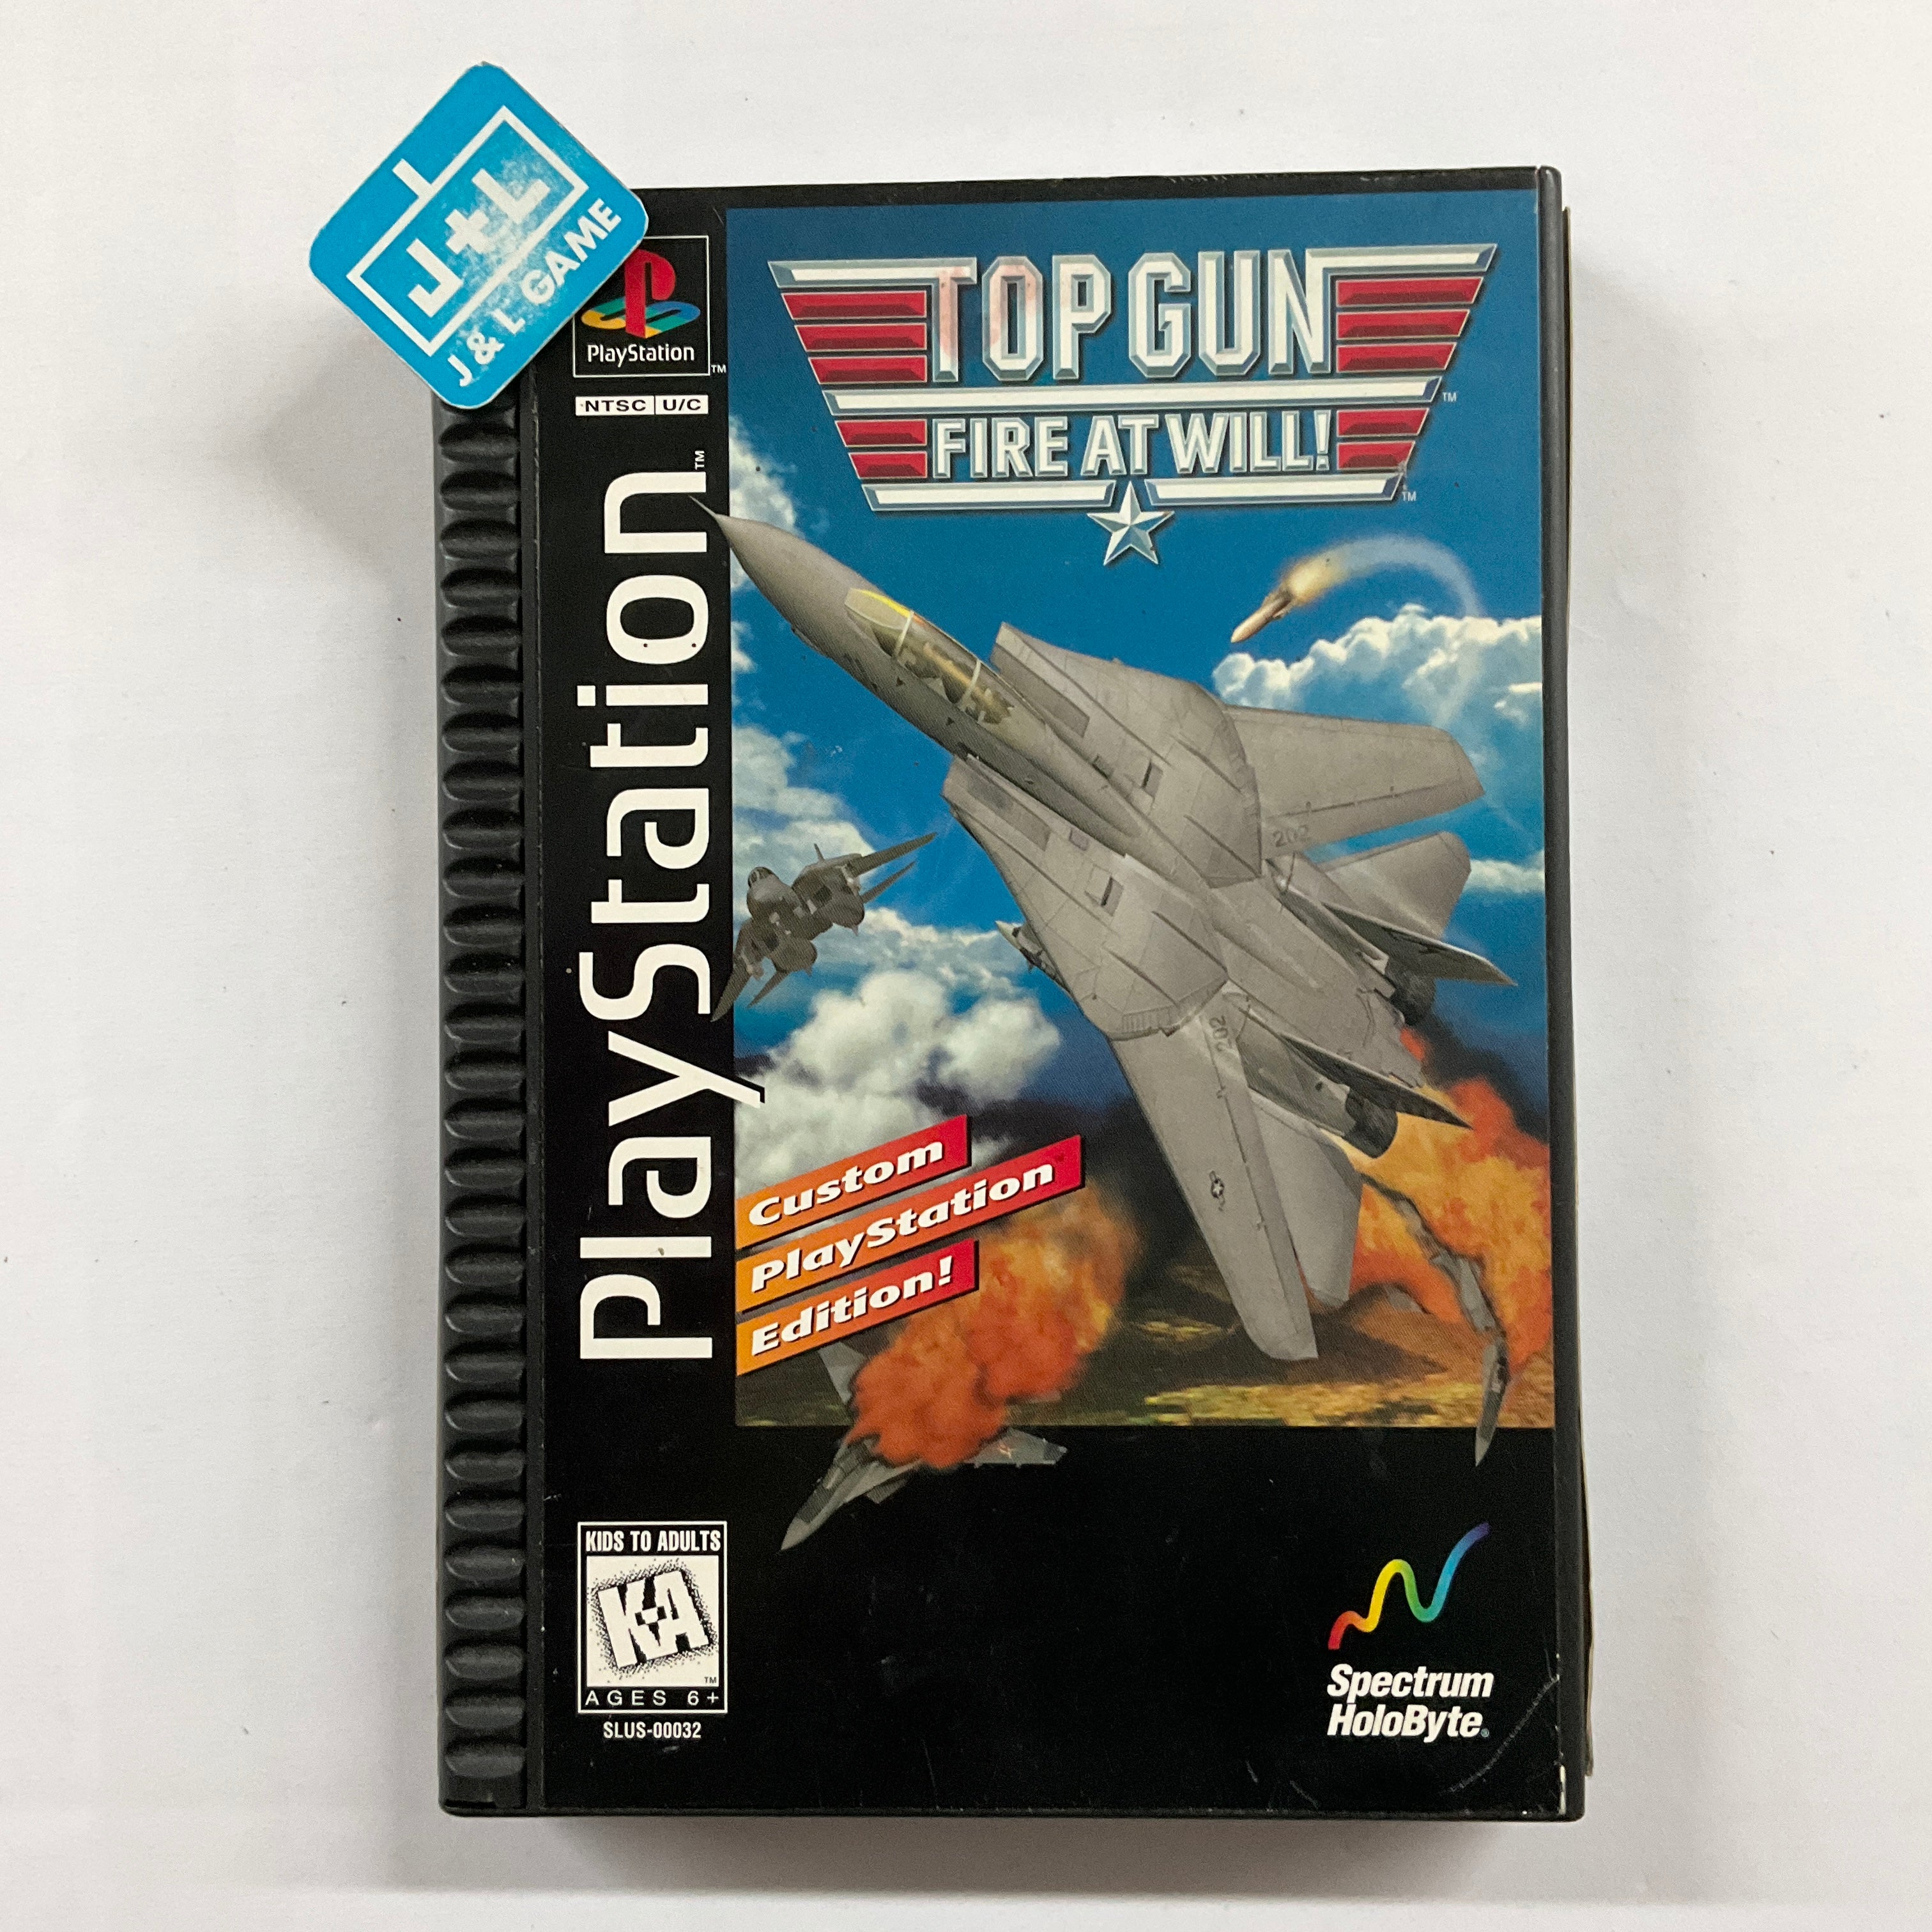 Top Gun: Fire at Will! (Long Box) - PlayStation 1 [Pre-Owned] Video Games Spectrum Holobyte   